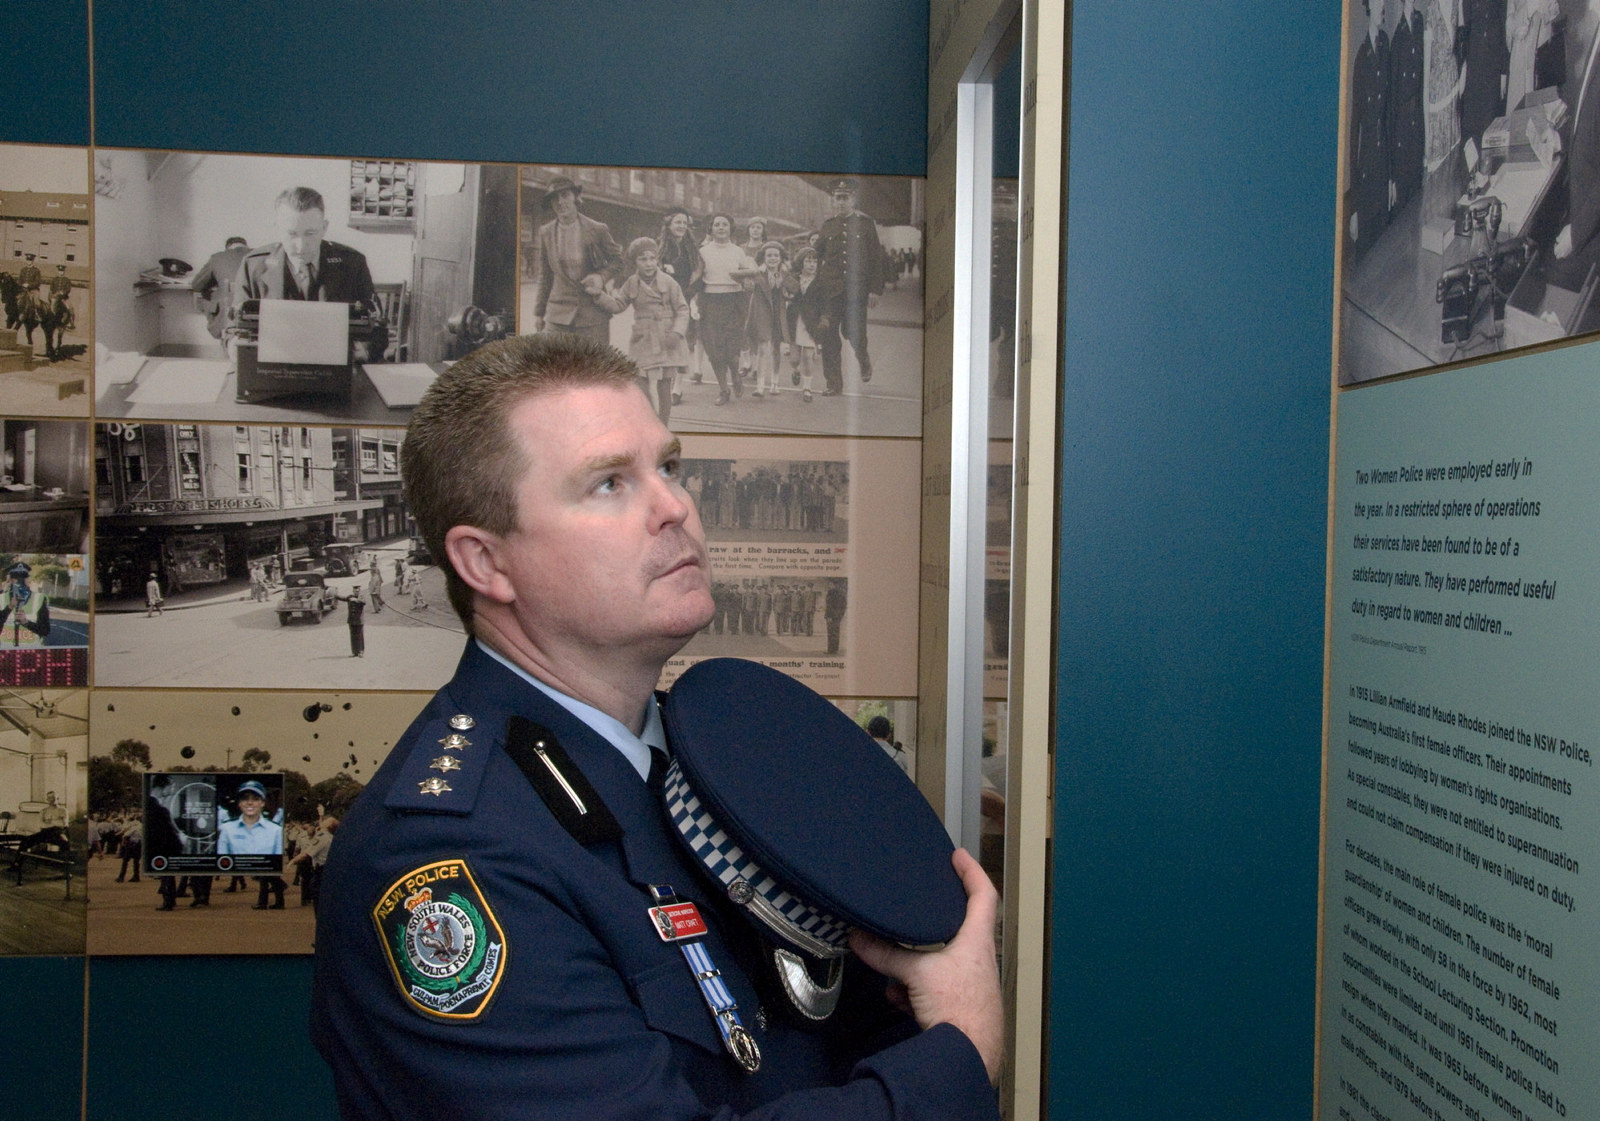 NSW Policeman Matt Craft at the Justice and Police Museum